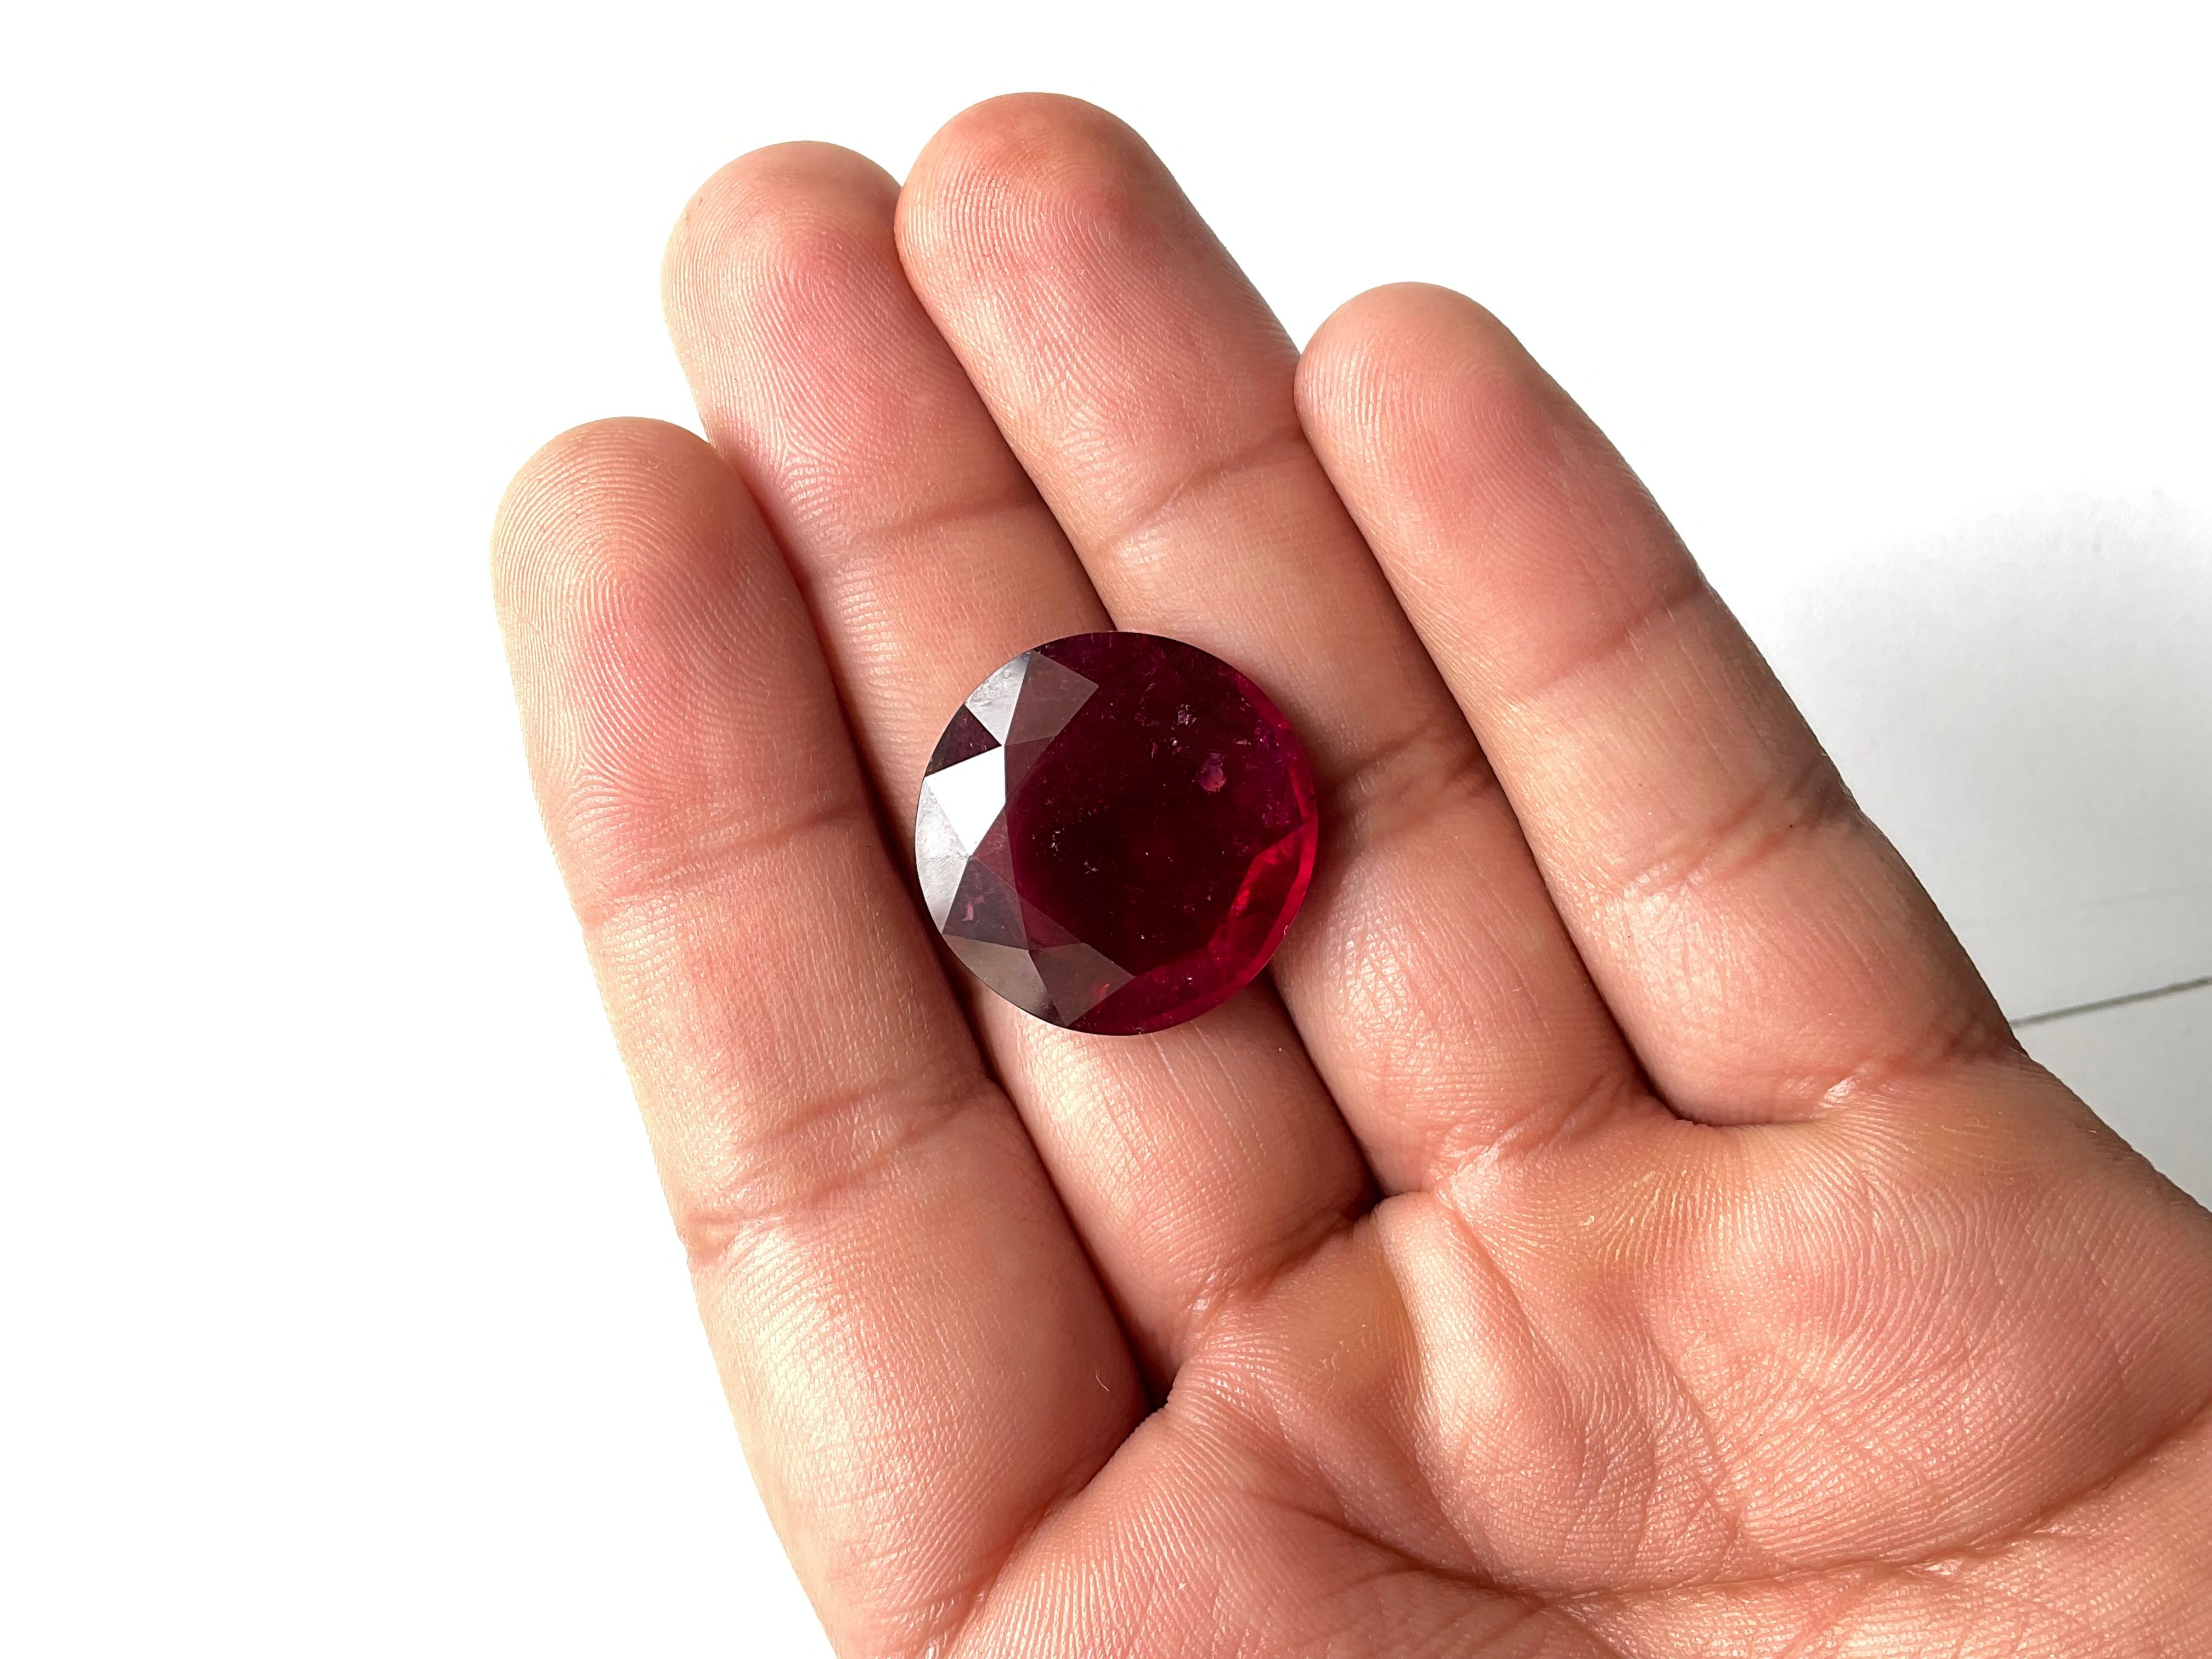 26.40 Carats Rubellite Tourmaline Round Cut Stone For Fine Jewelry Natural gem For Sale 3